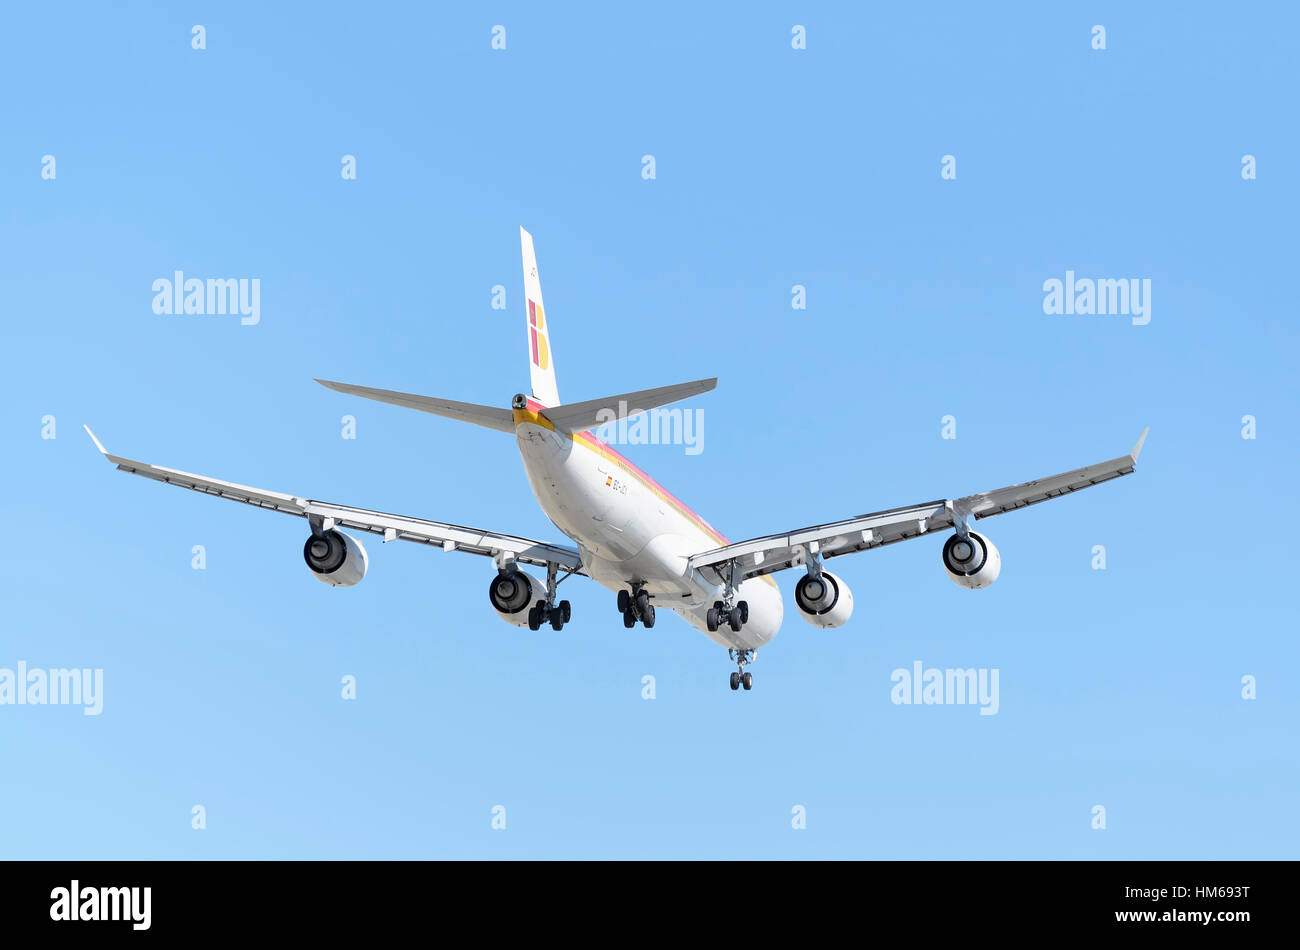 Airplane Airbus A340, of Iberia airline. Rear view. Blue sky. Stock Photo